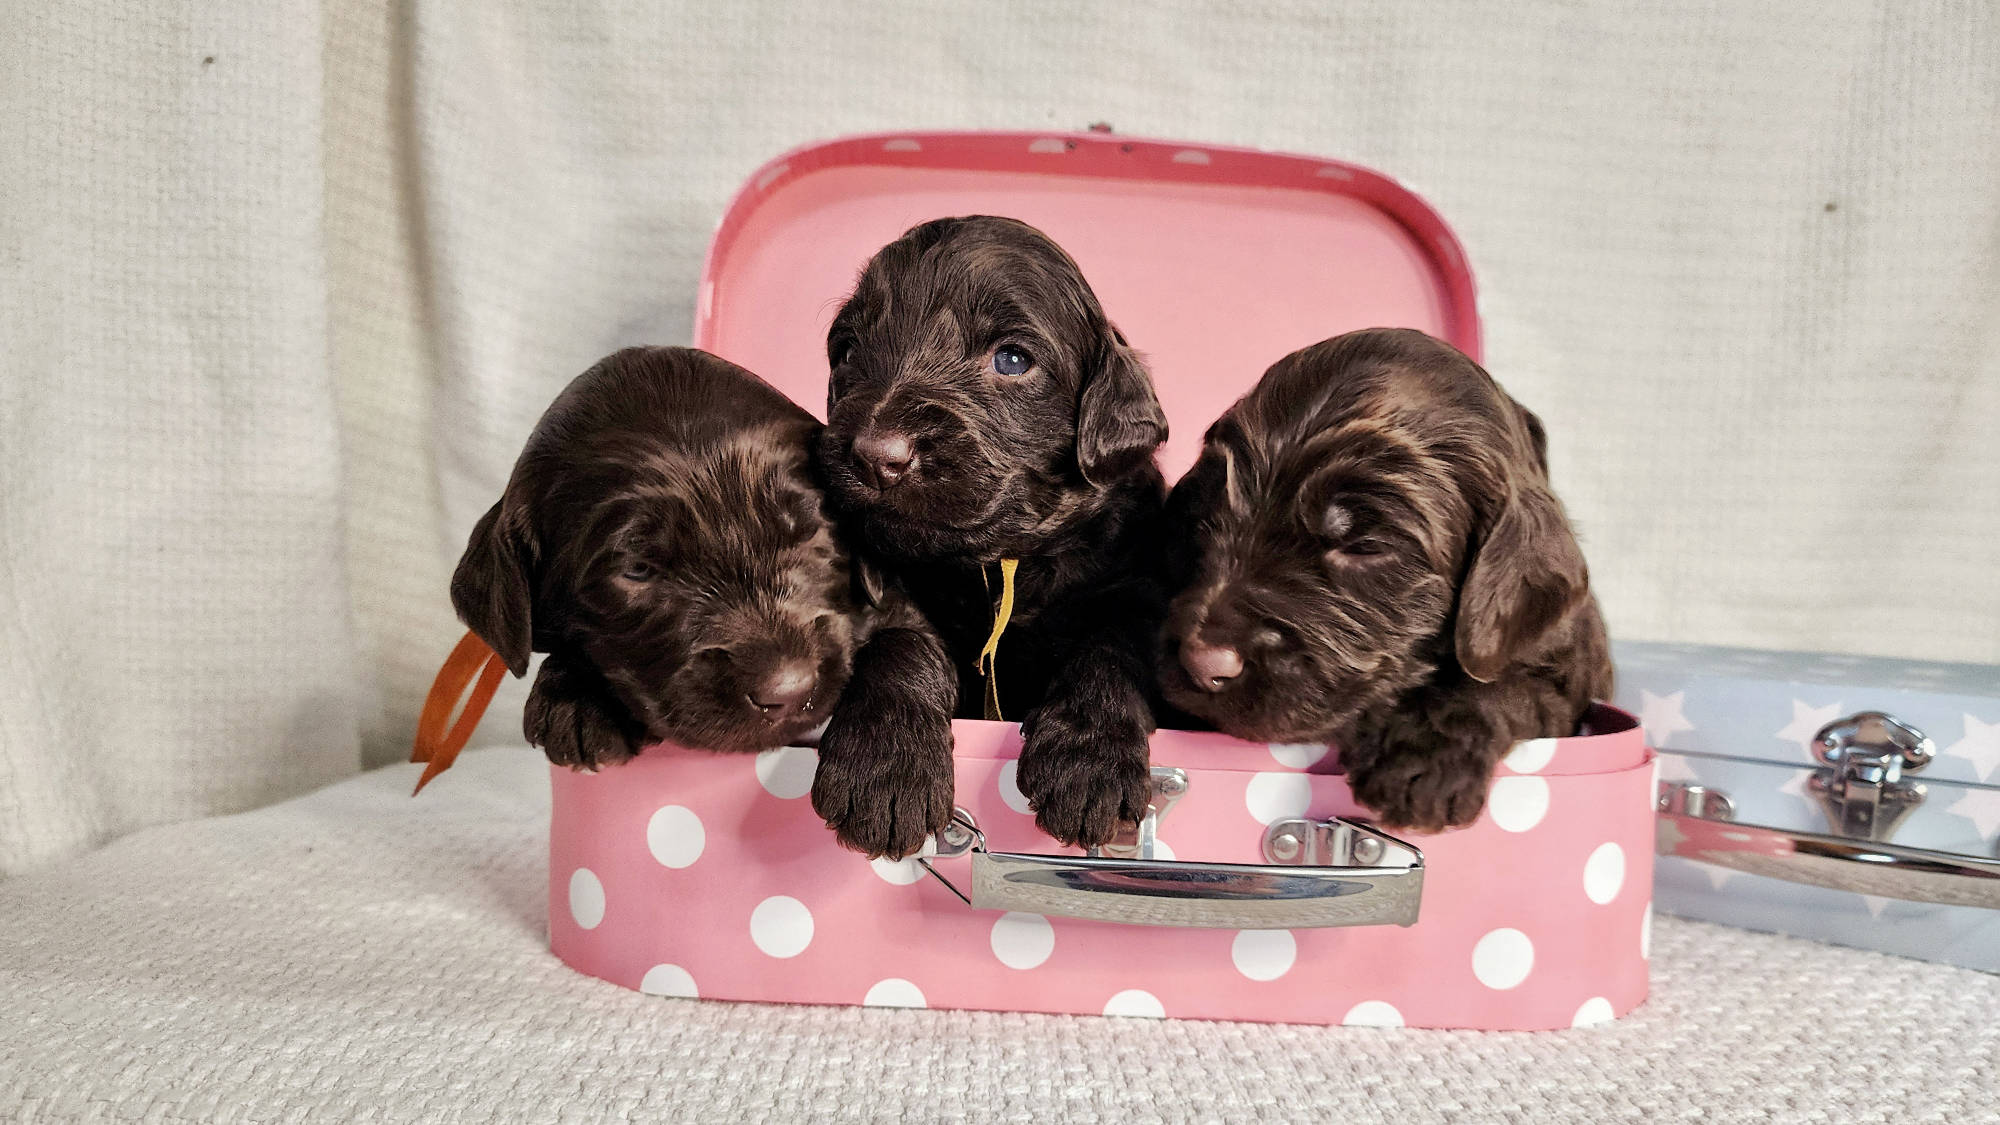 Big Rock Labradoodles - Famous Dogs photoshoot showing 3 puppies in a little pink suitcase